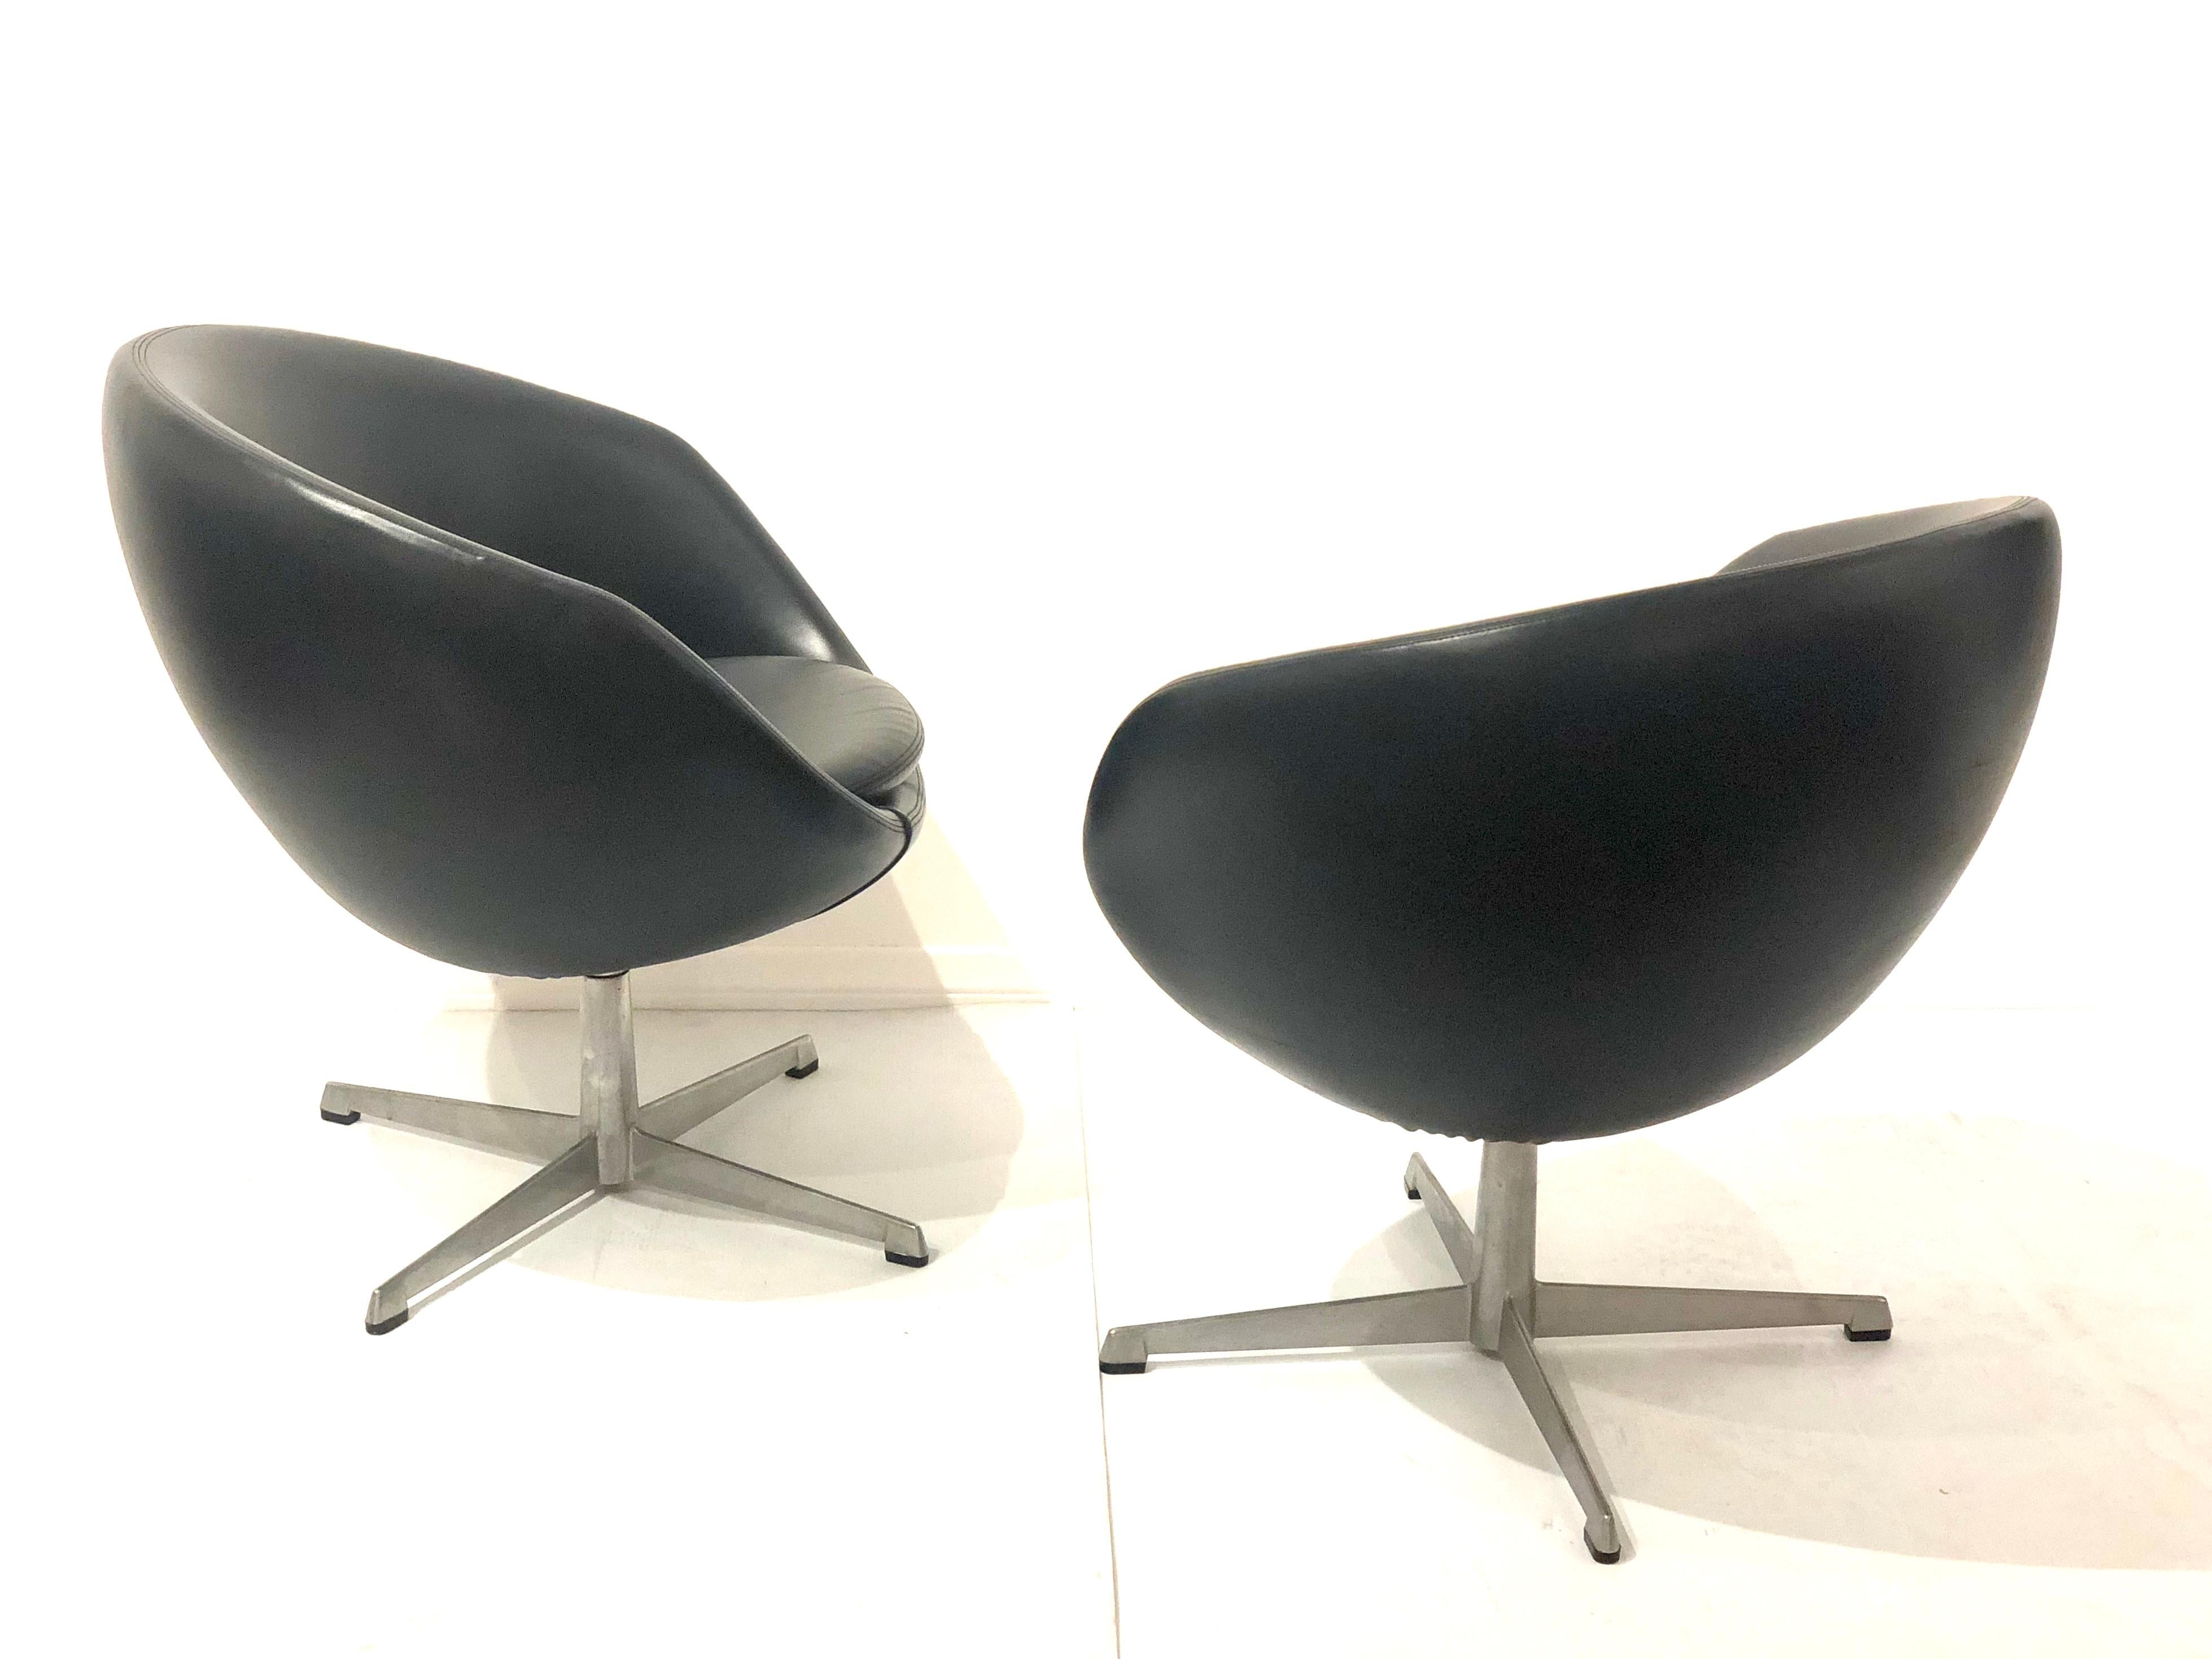 Space Age Pair of Danish Modern Petite Swivel Chairs by Overman